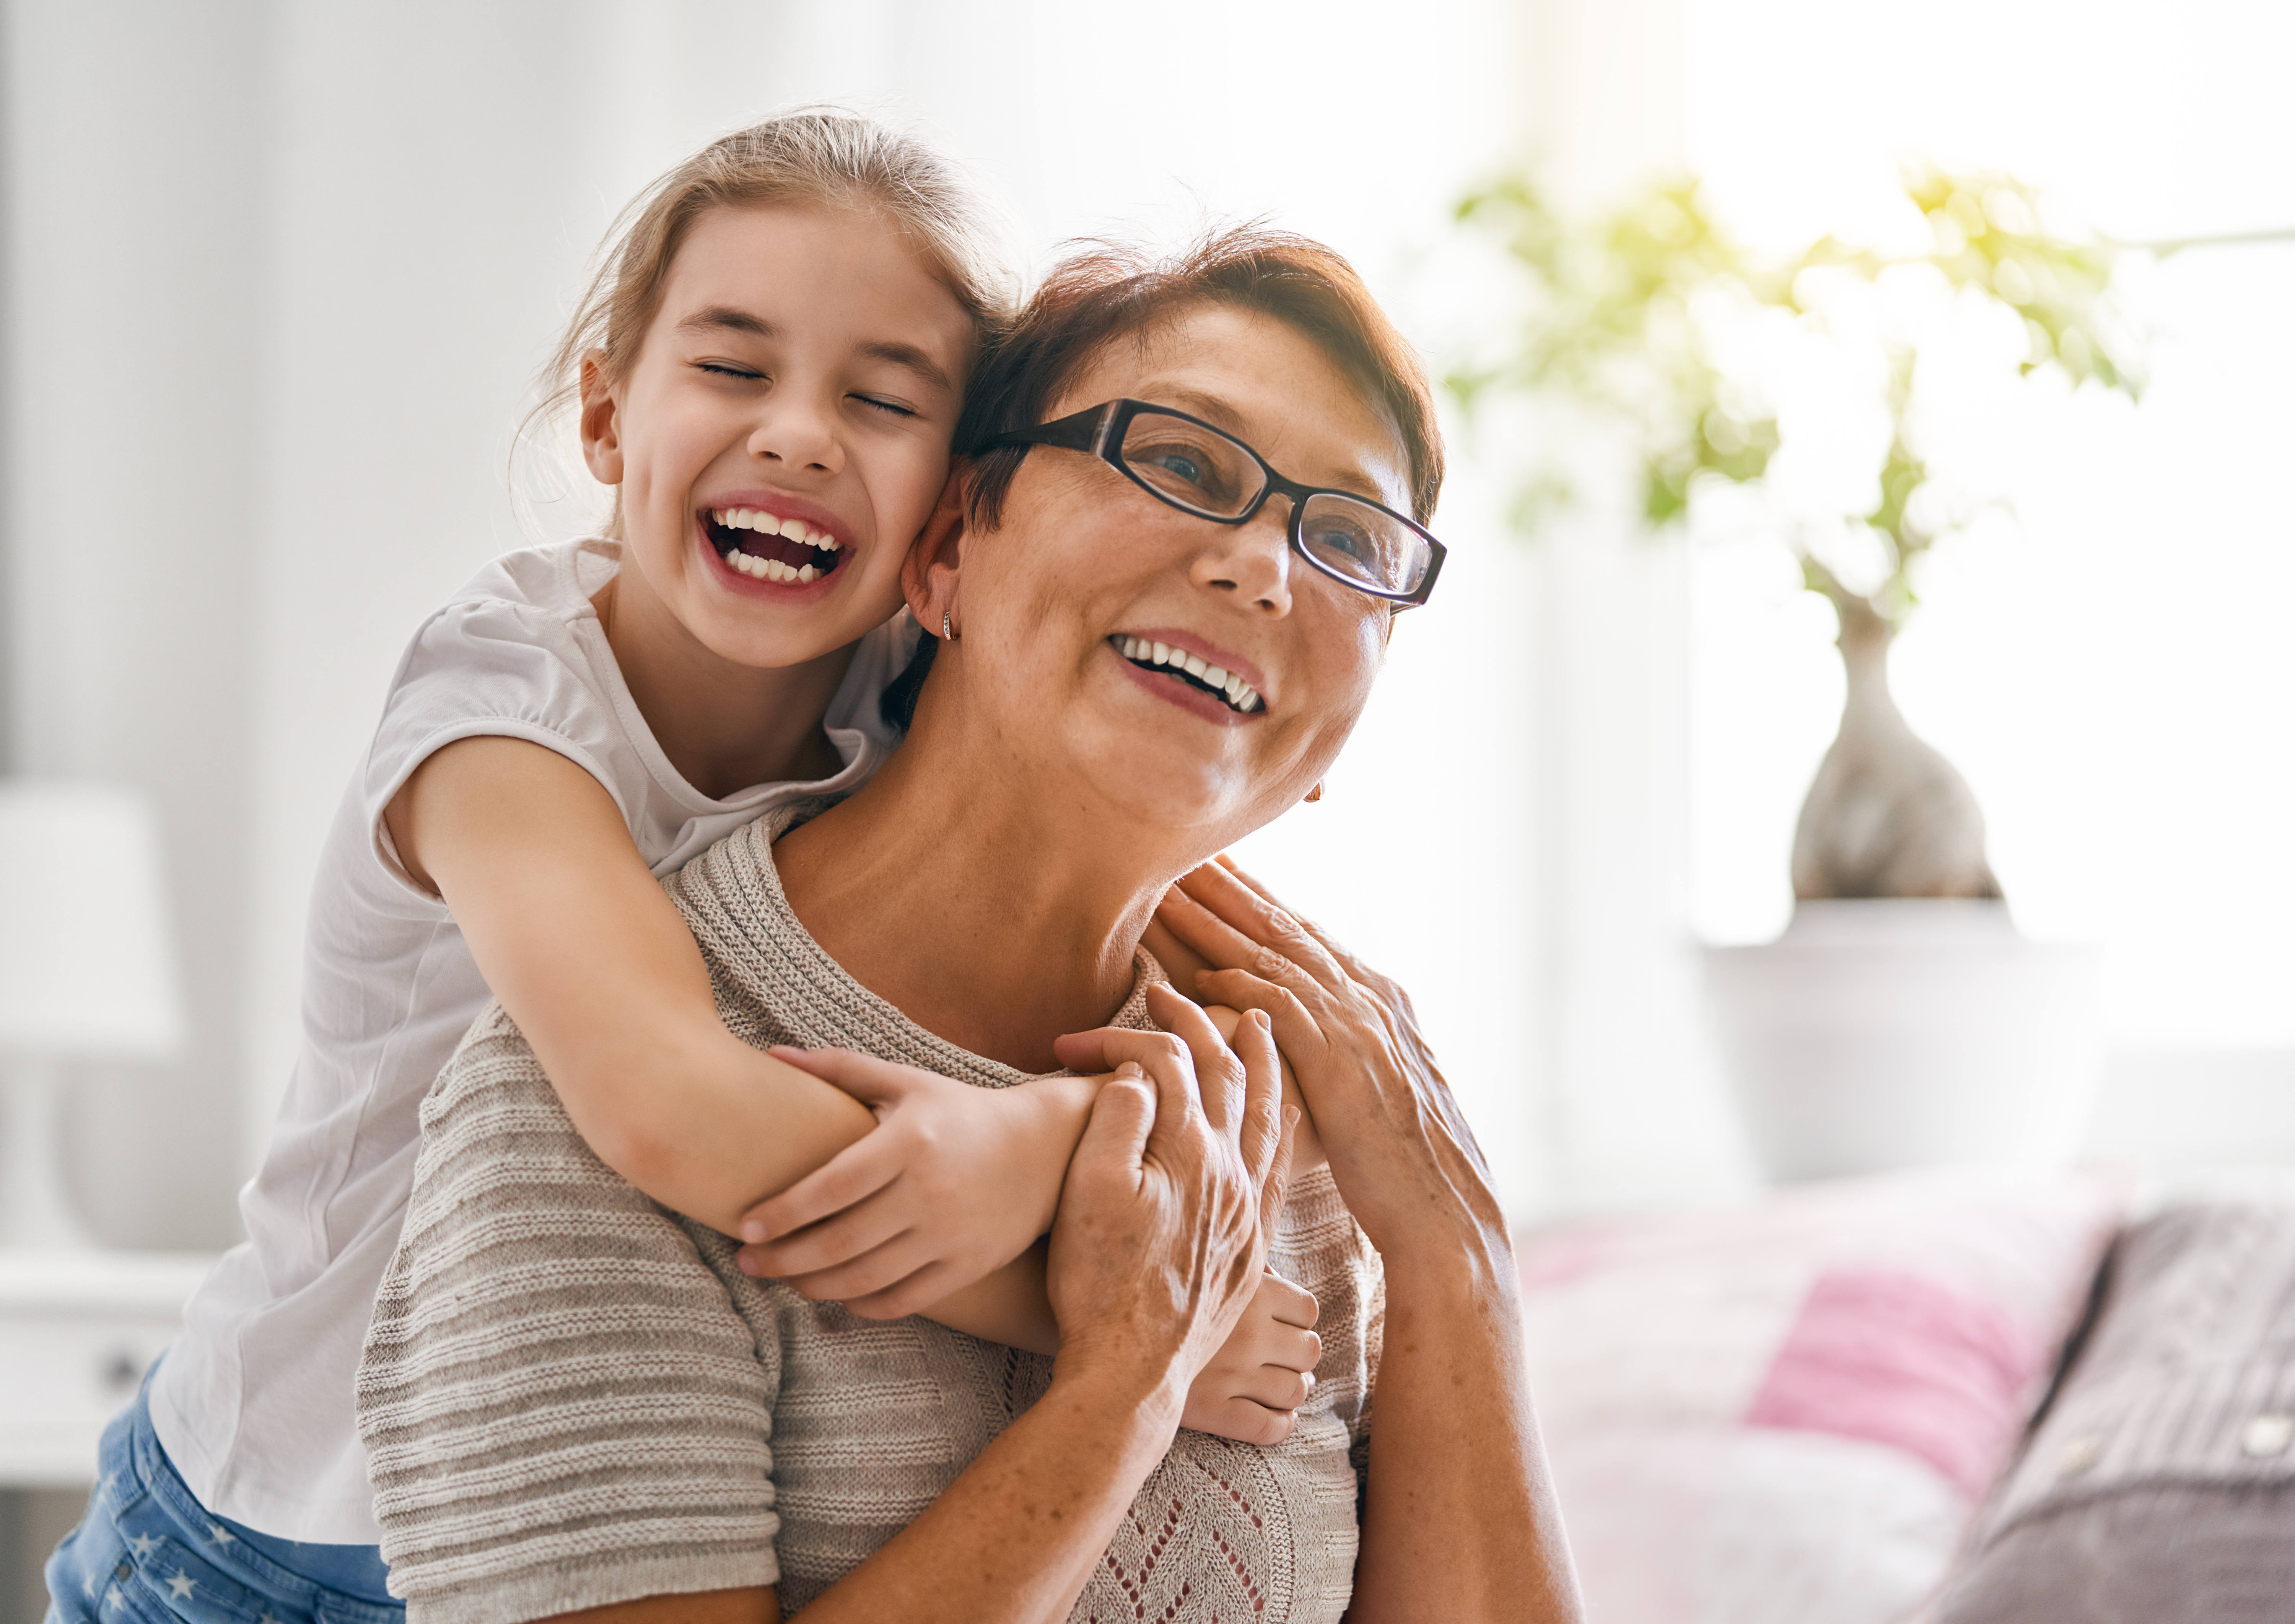 A little girl and her grandmother smiling | Source: Shutterstock